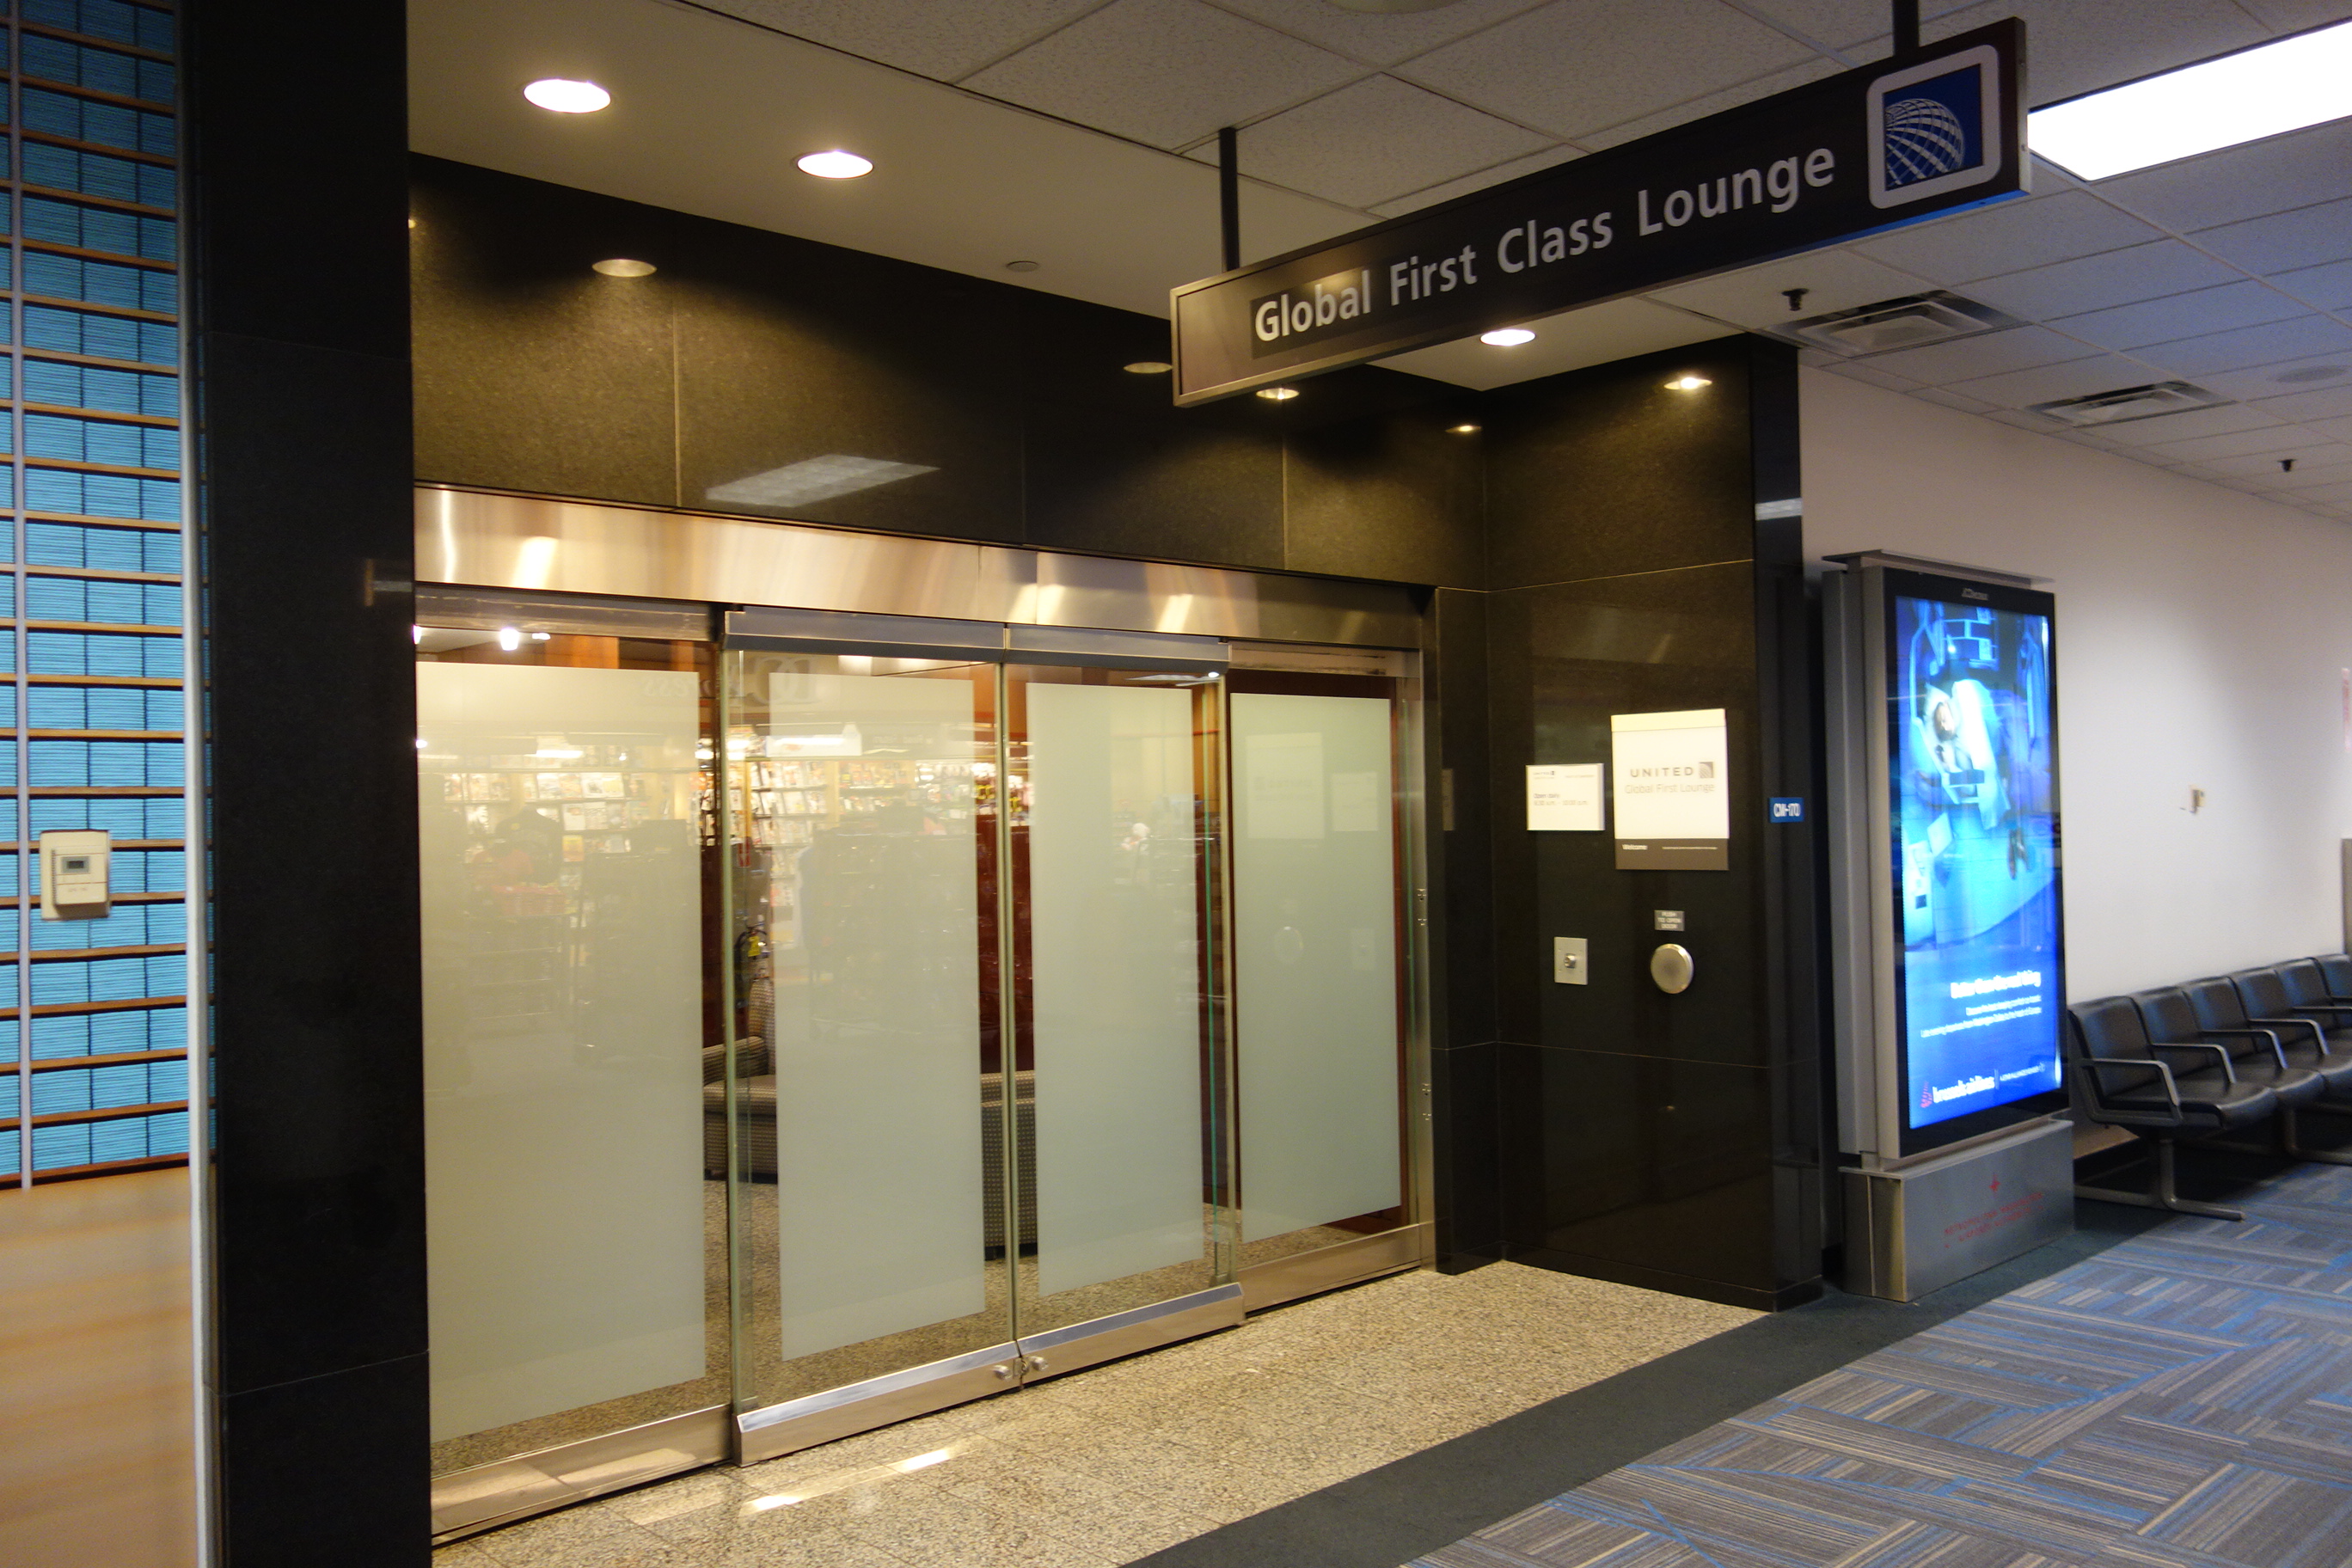 Entrance to the lounge, near the end of the C terminal around gate C2